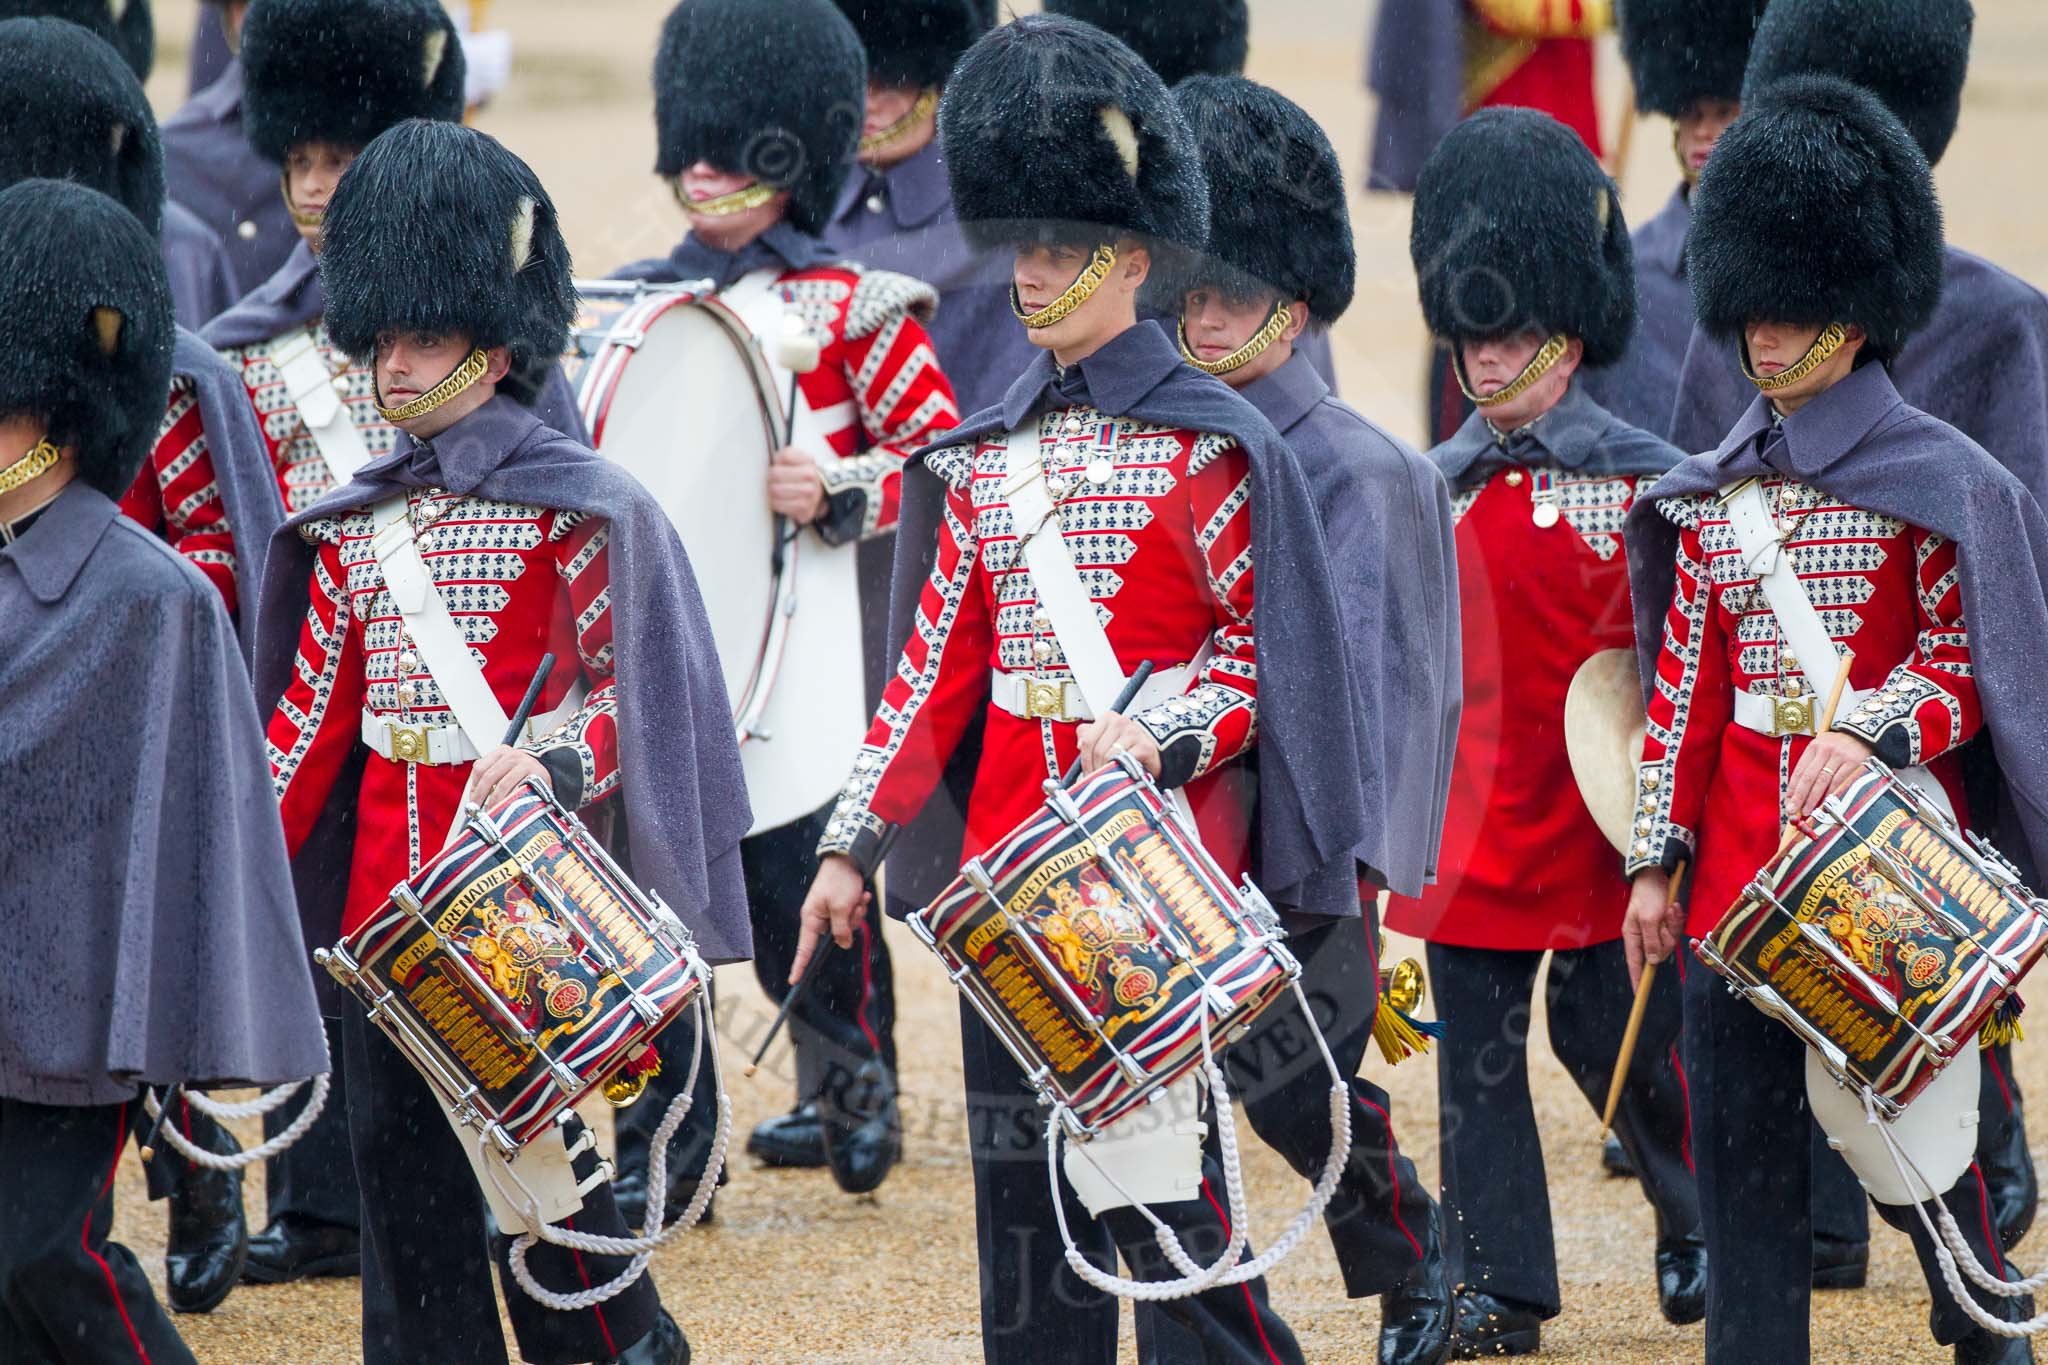 The Colonel's Review 2014.
Horse Guards Parade, Westminster,
London,

United Kingdom,
on 07 June 2014 at 10:21, image #104